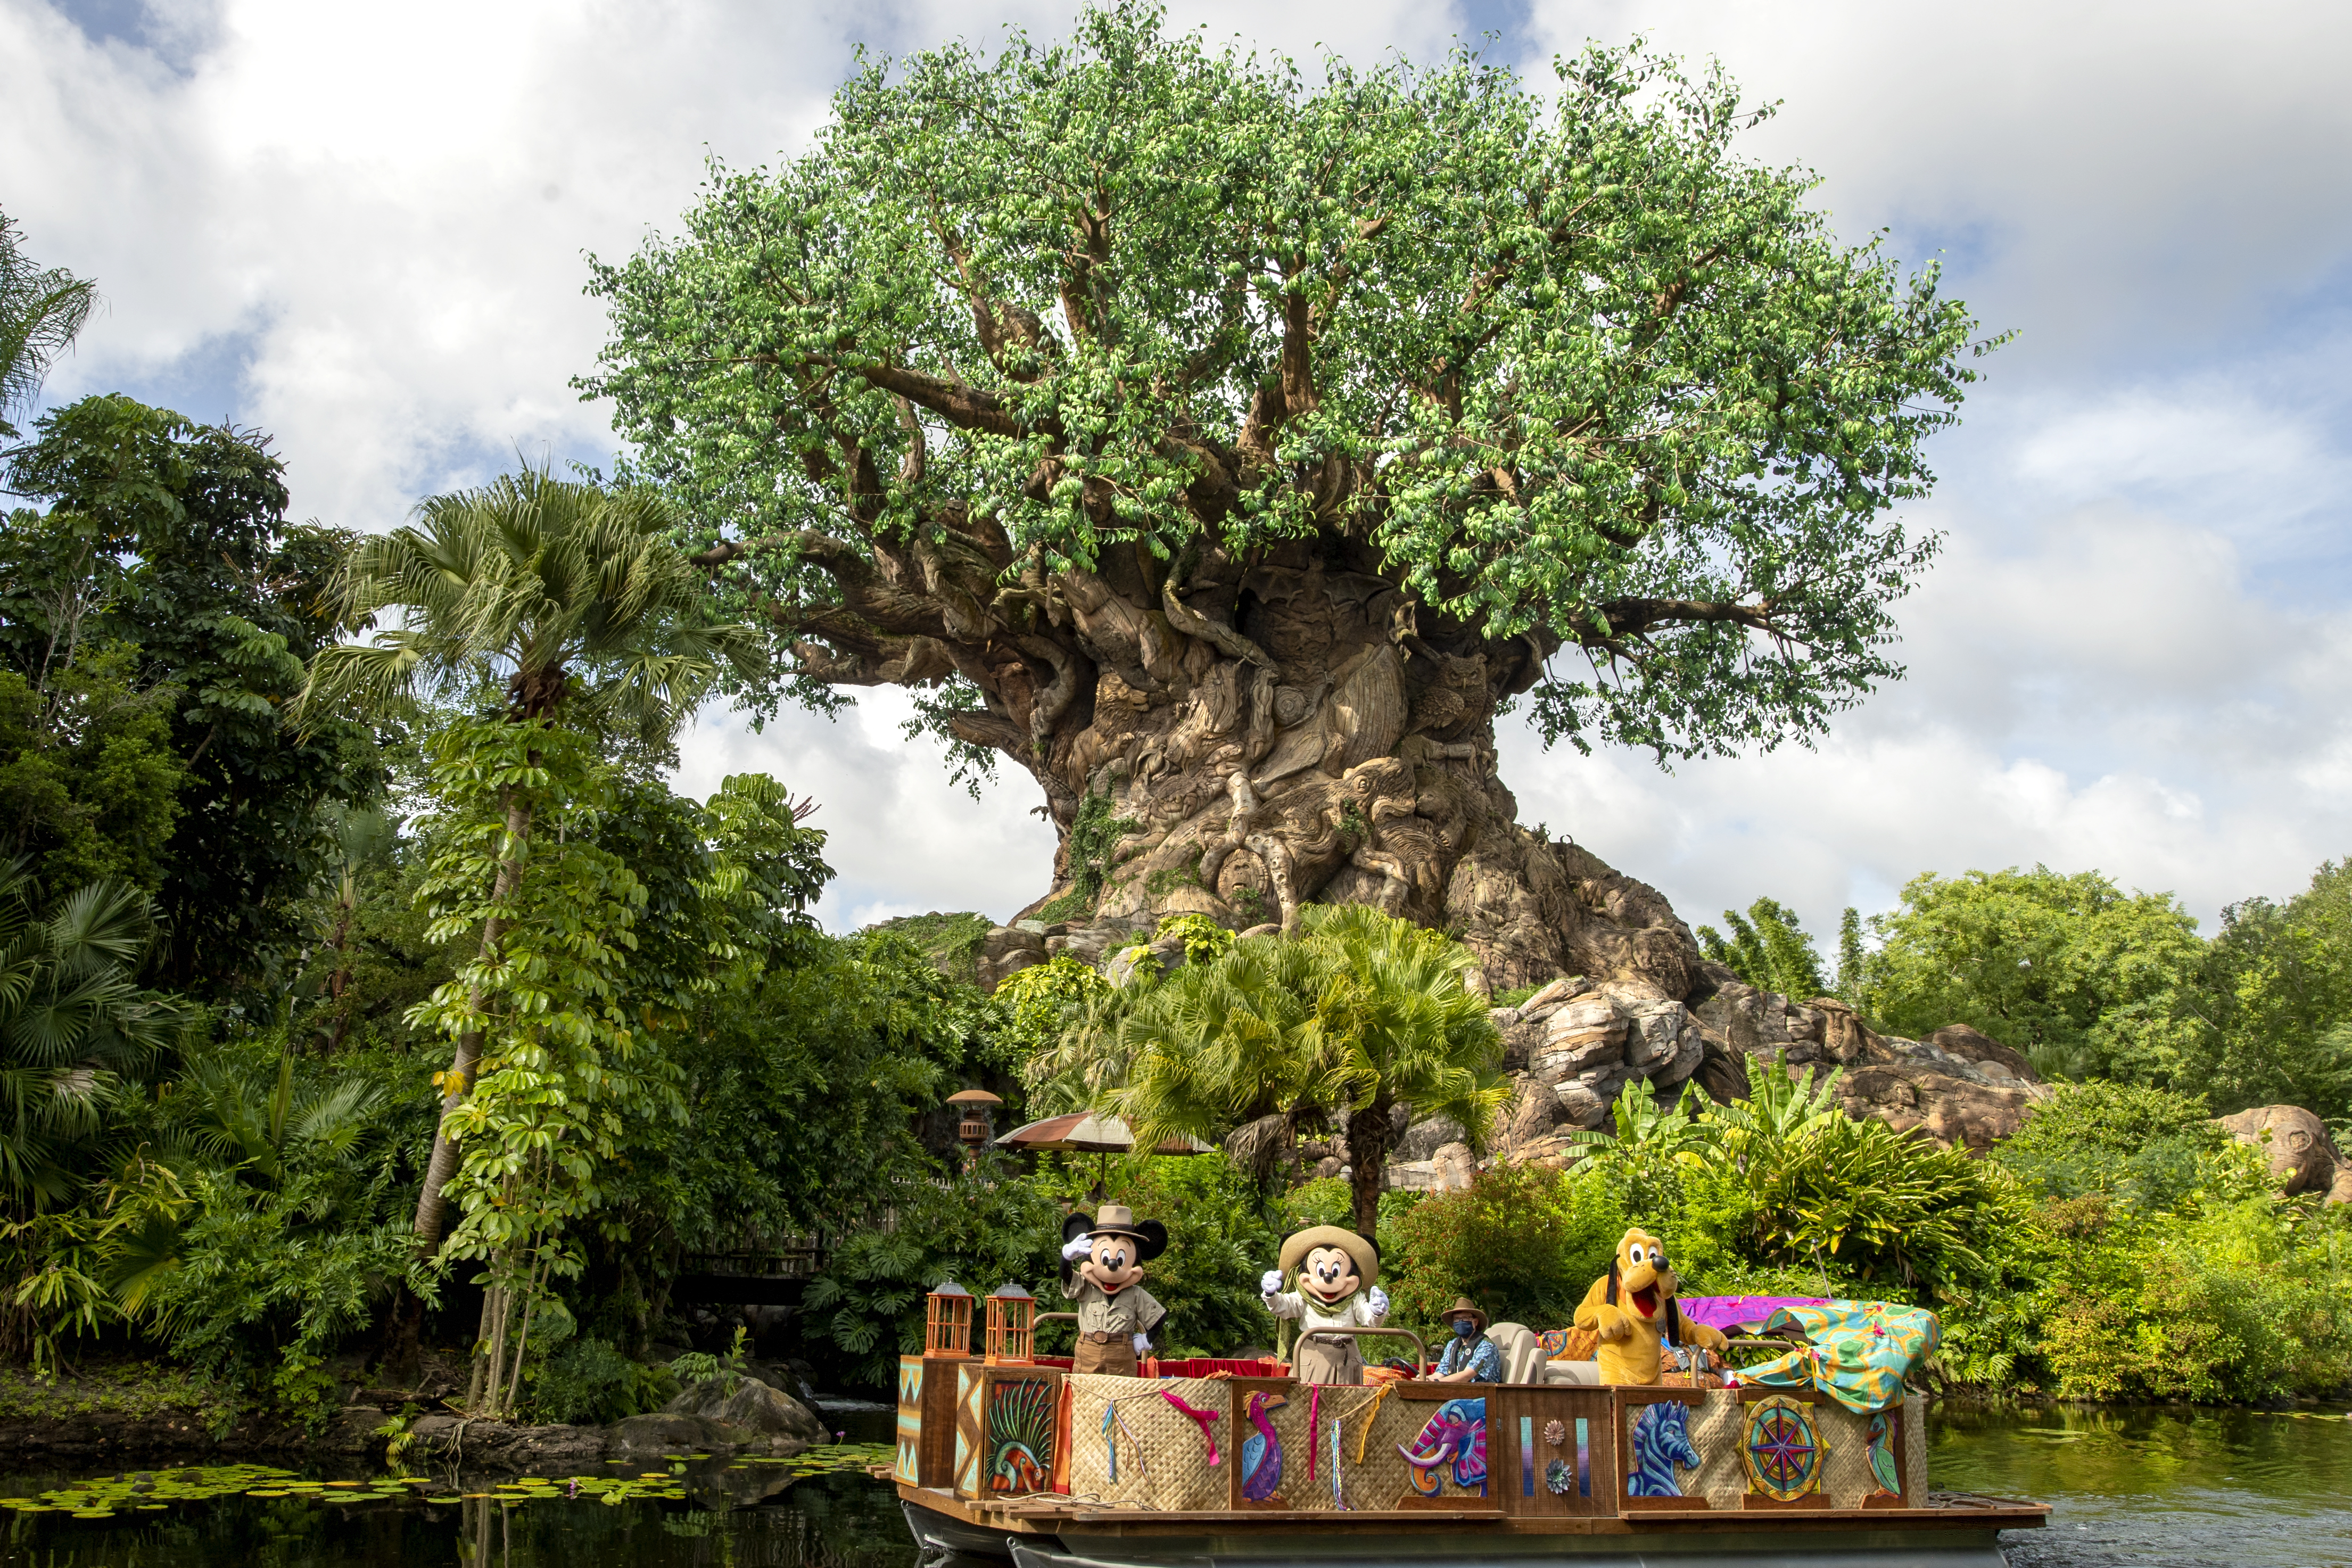 Things Many People Don’t Know About Animal Kingdom